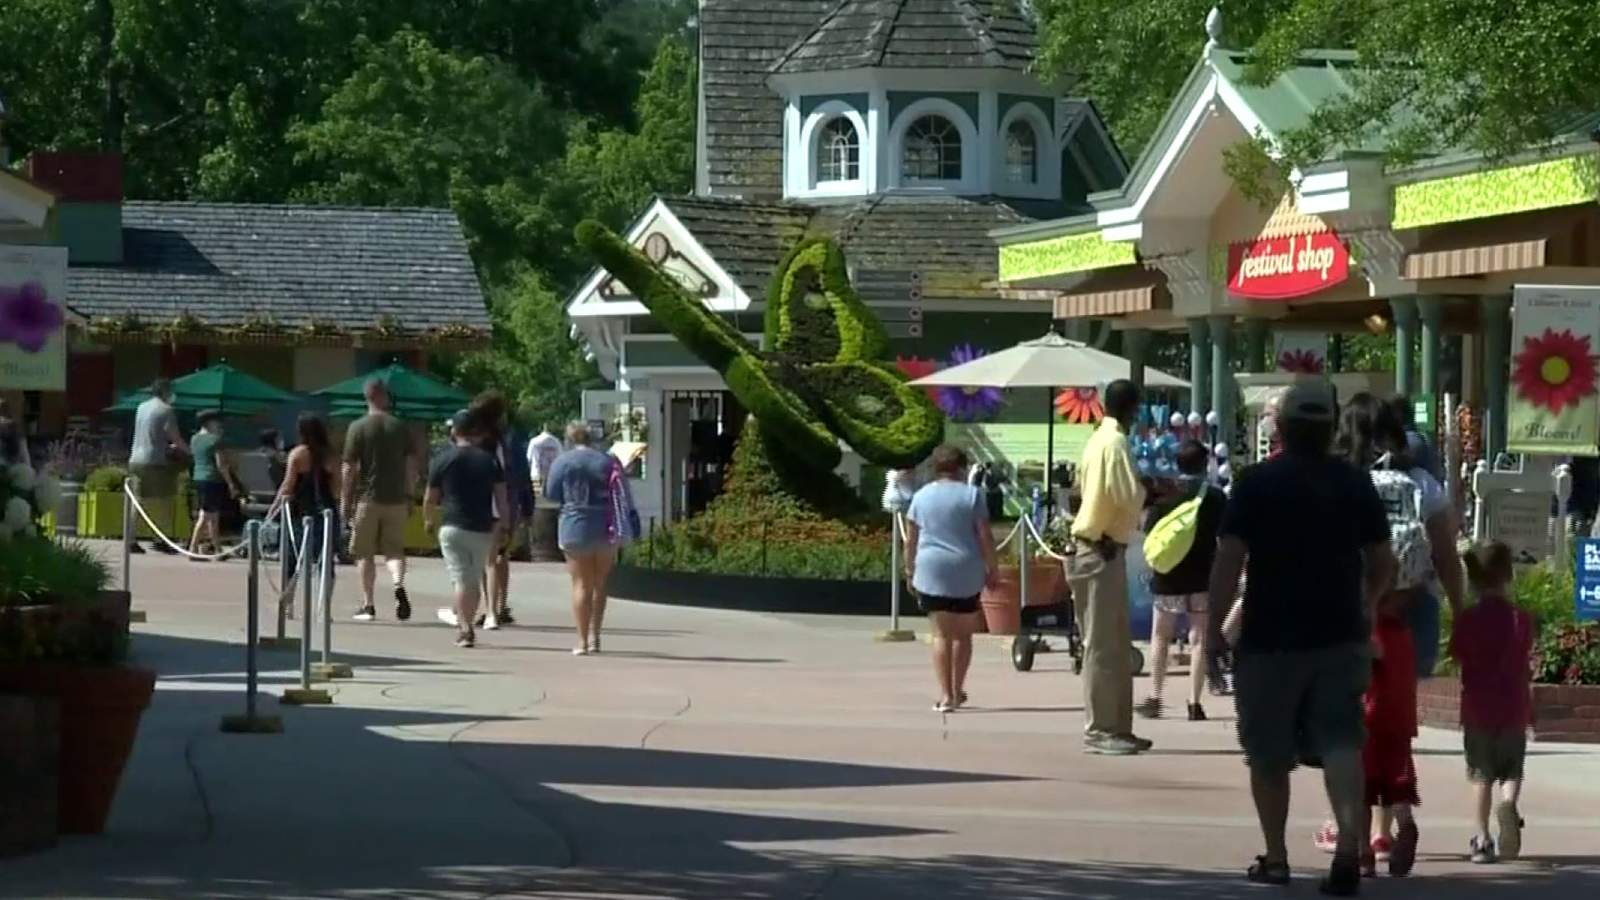 What to know about Dollywood’s 2021 season ahead of Saturday’s reopening